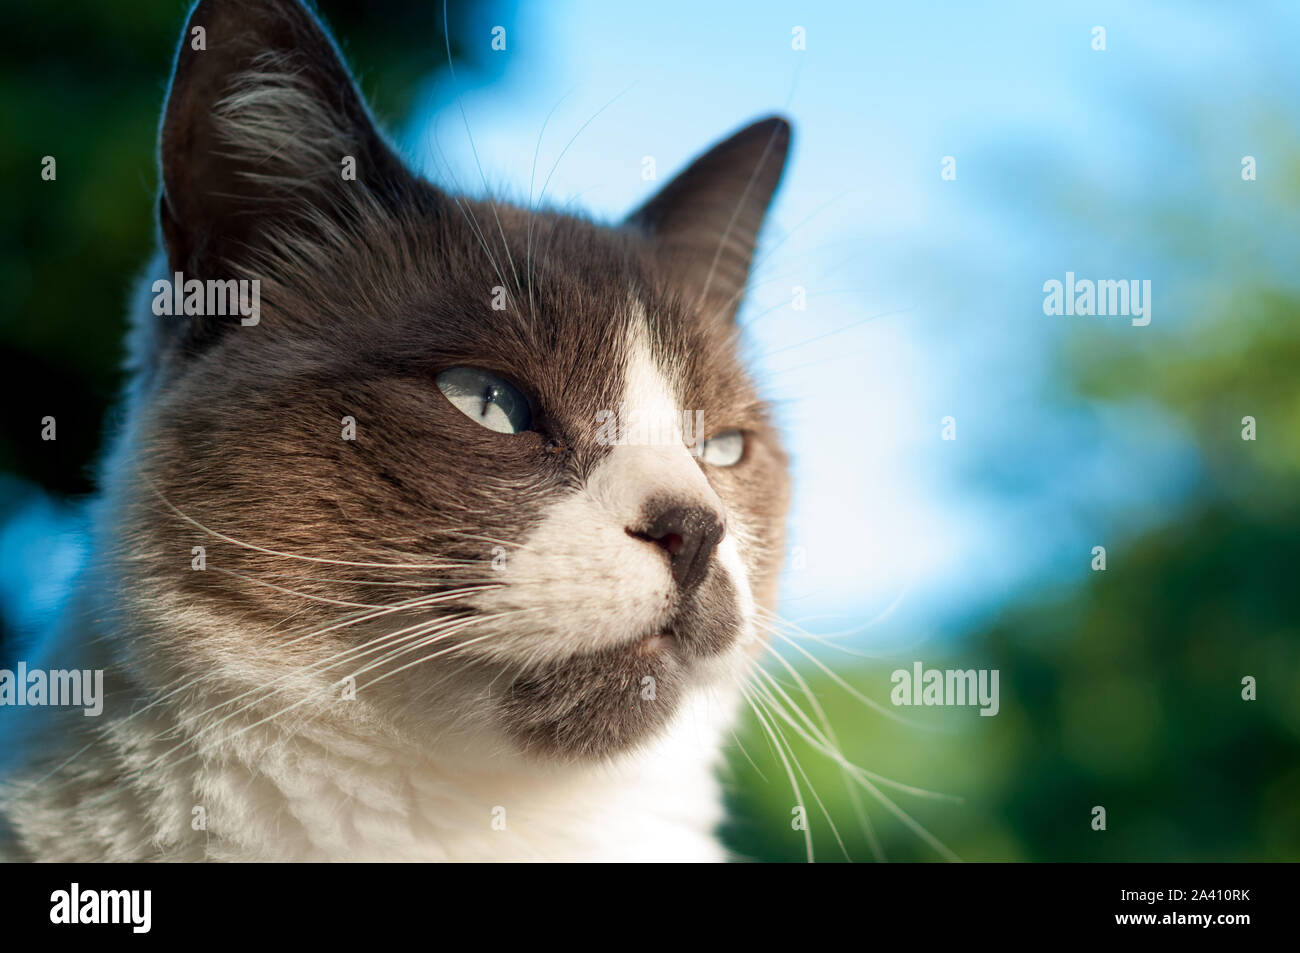 beautiful grumpy seal point close up cat's face. blue sky in the background Stock Photo